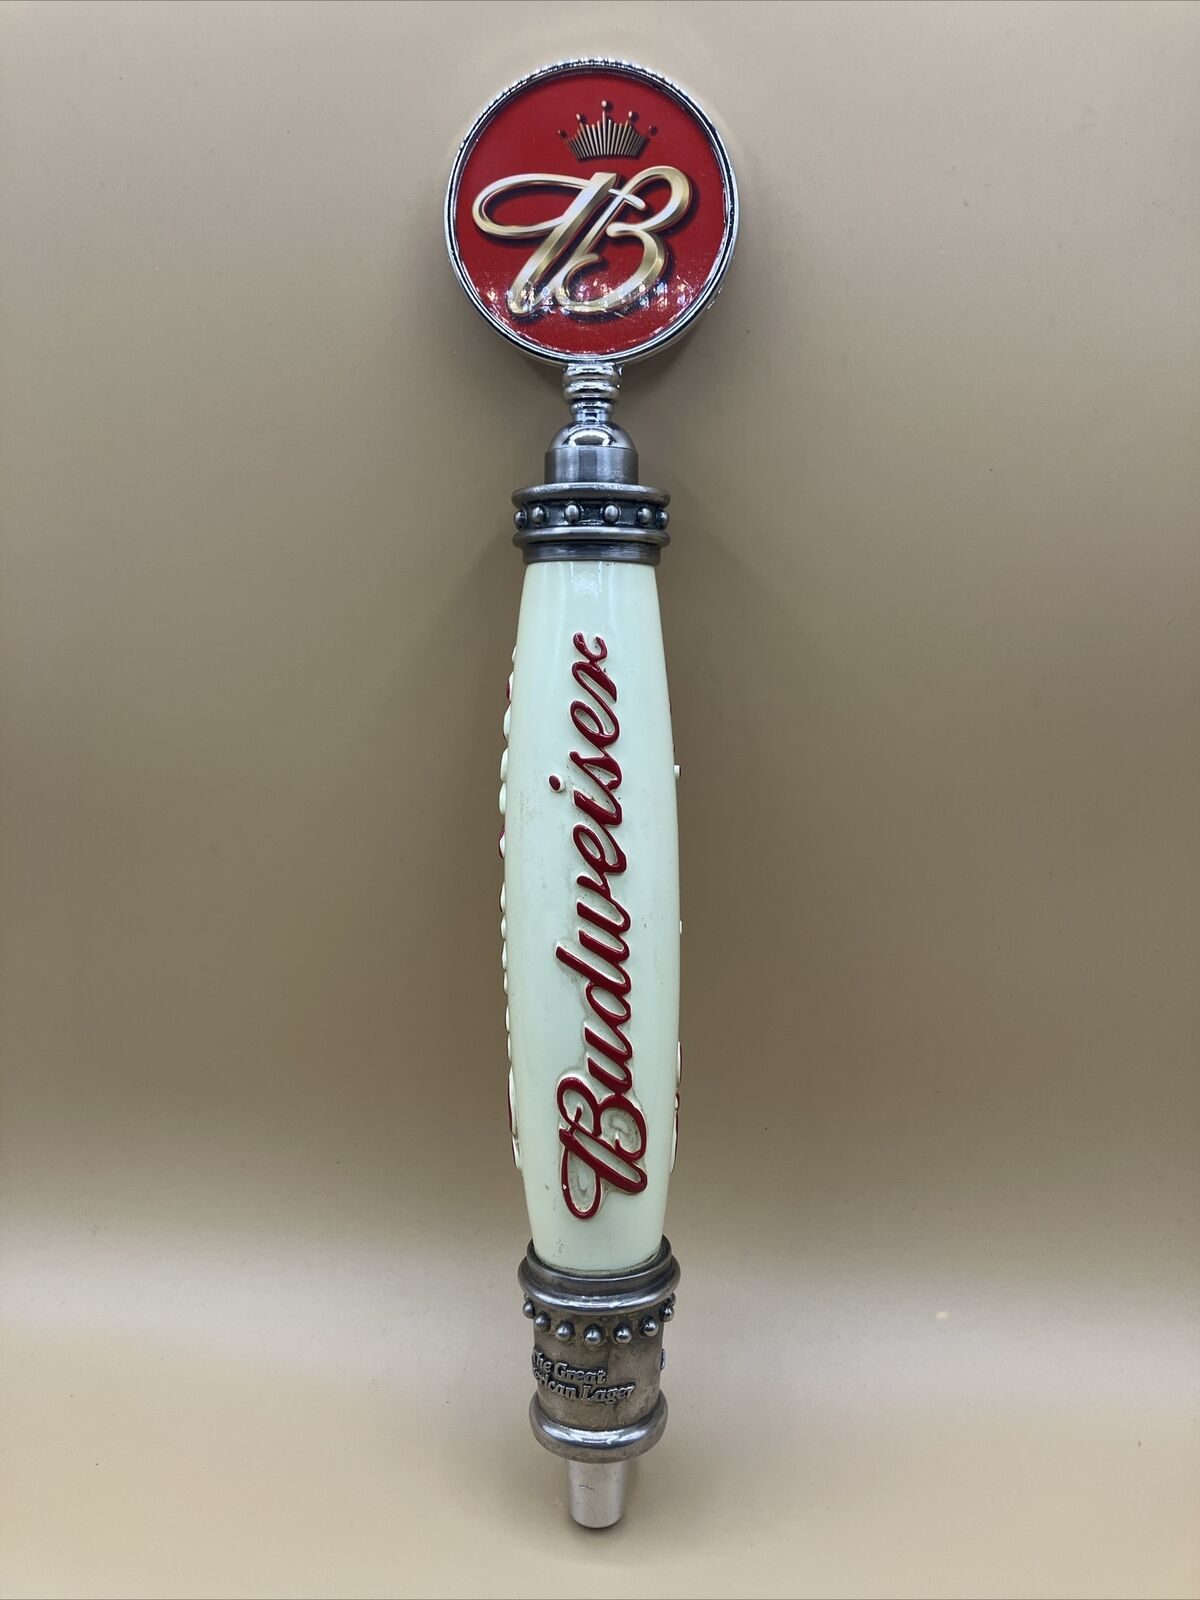 Rare Original Vintage Budweiser Beer Tap Pull Handle With AB Crown Topper 15”